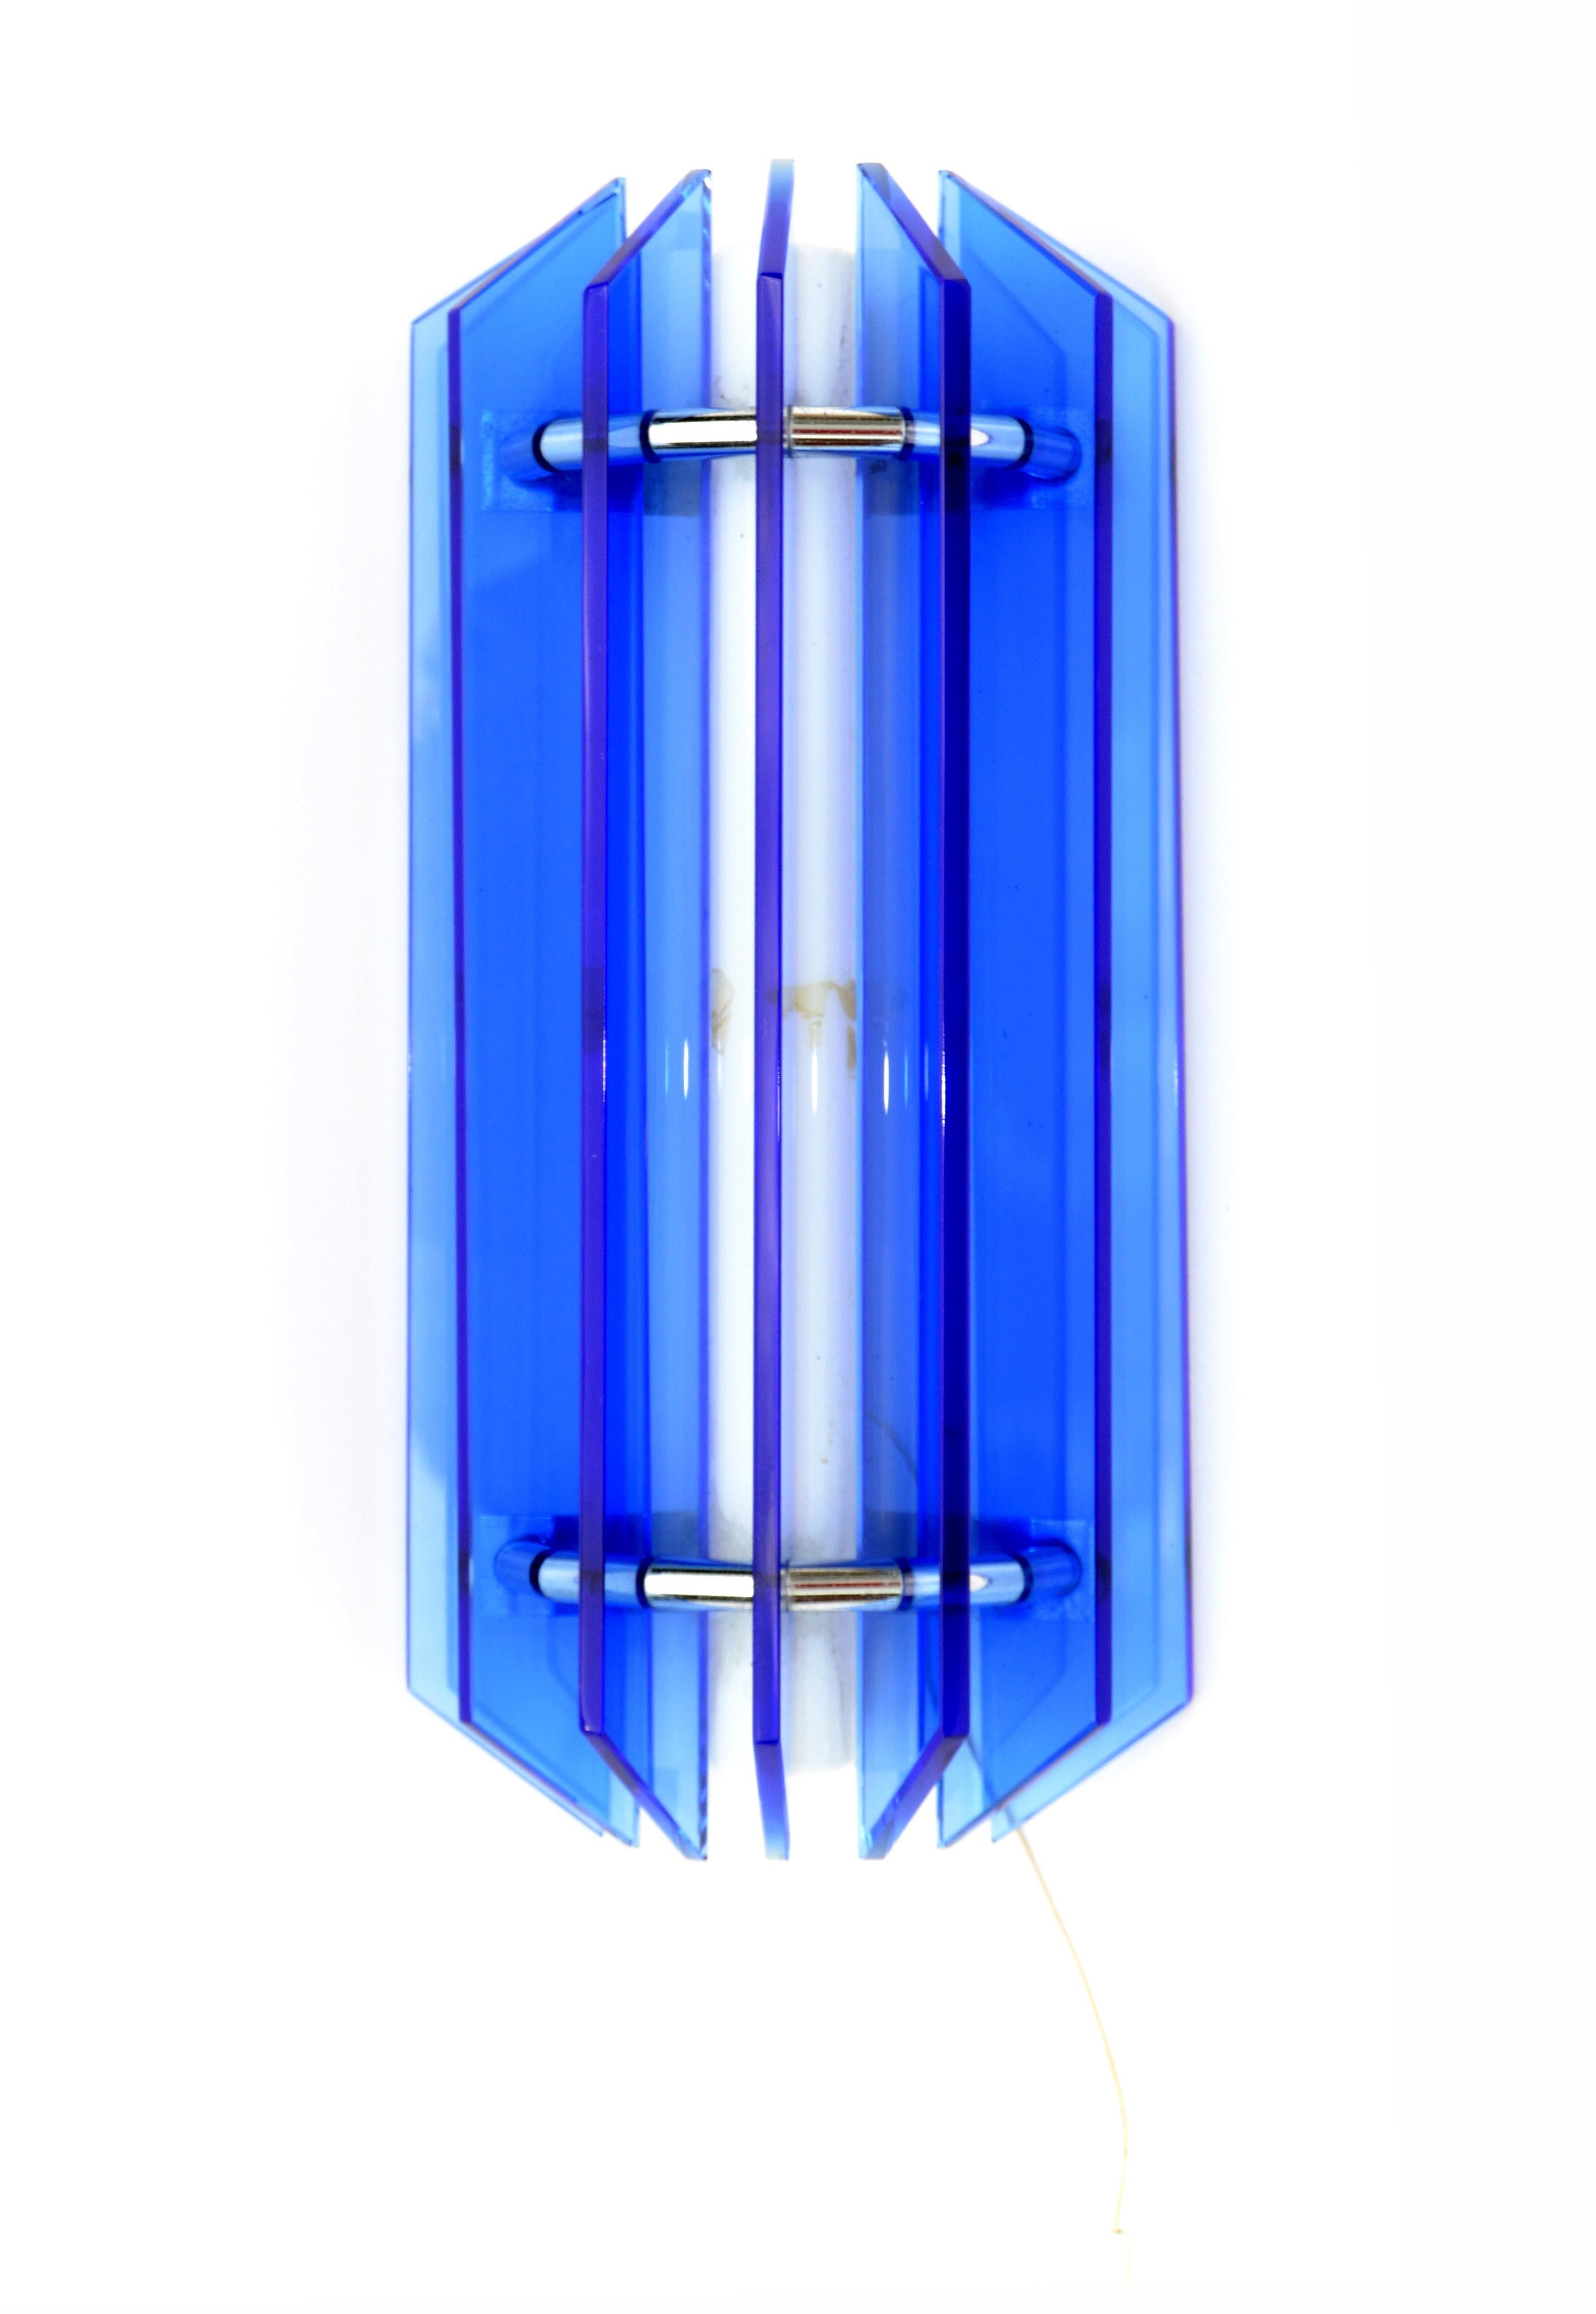 Stunning blue glass blades large sconce by VECA with chrome details, made in Italy in the late 1960s.
In perfect working condition and uses one tubular neon Light max. 60 watts.
Comes with a string pull and can be mounted horizontal or vertical.